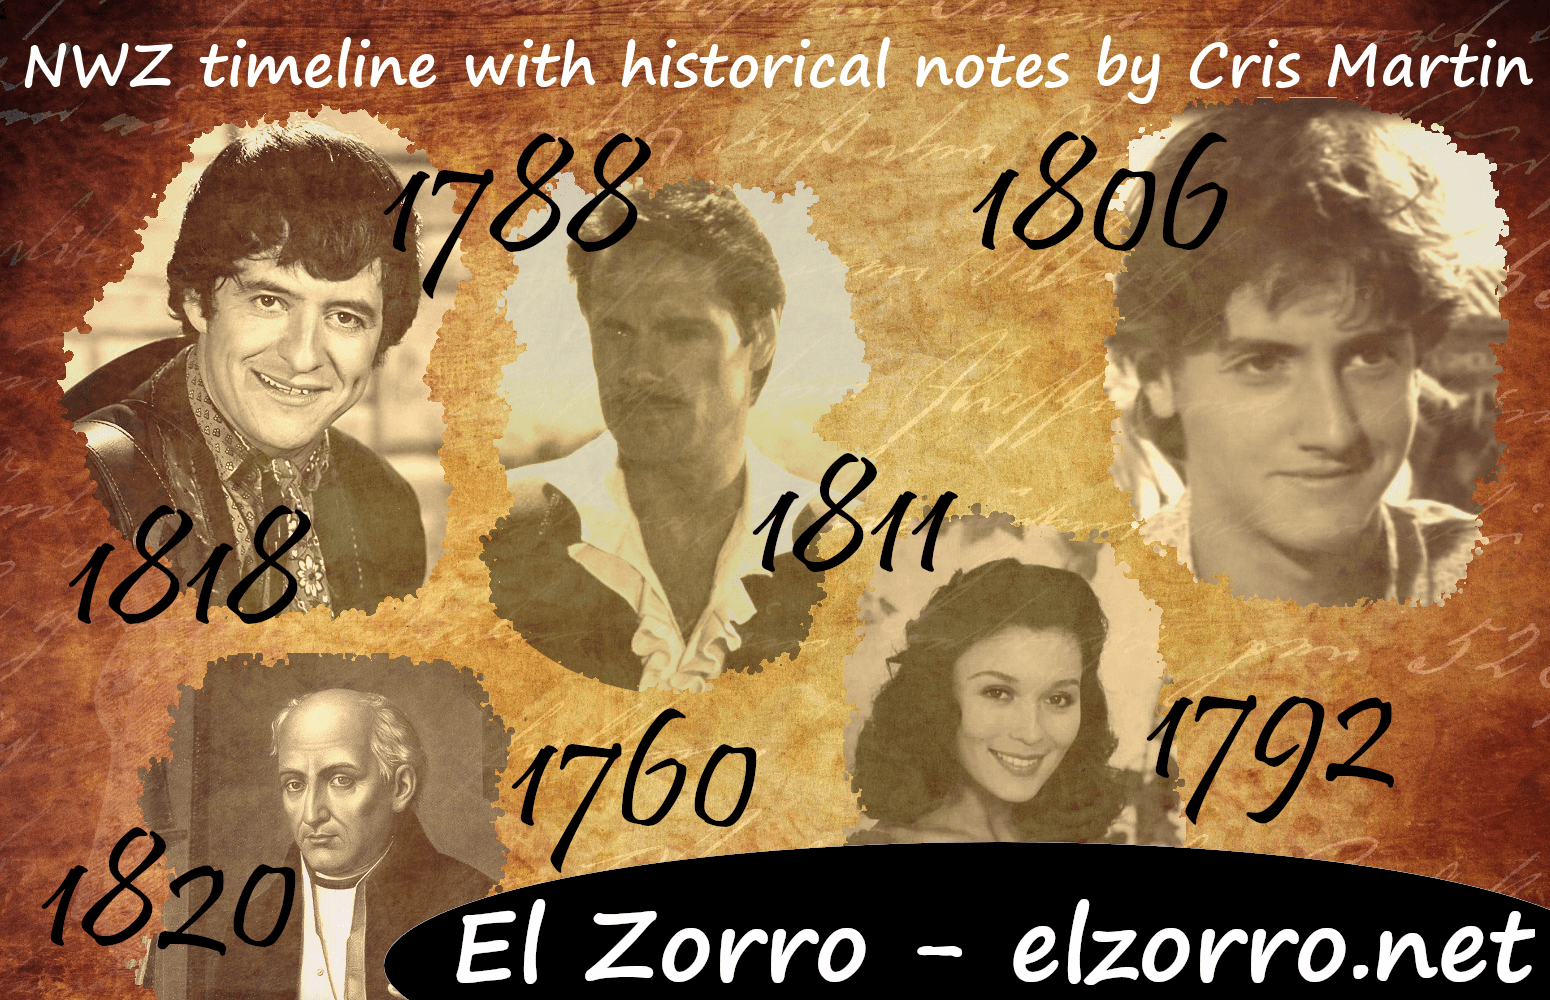 NWZ timeline with historical notes by Cris Martin